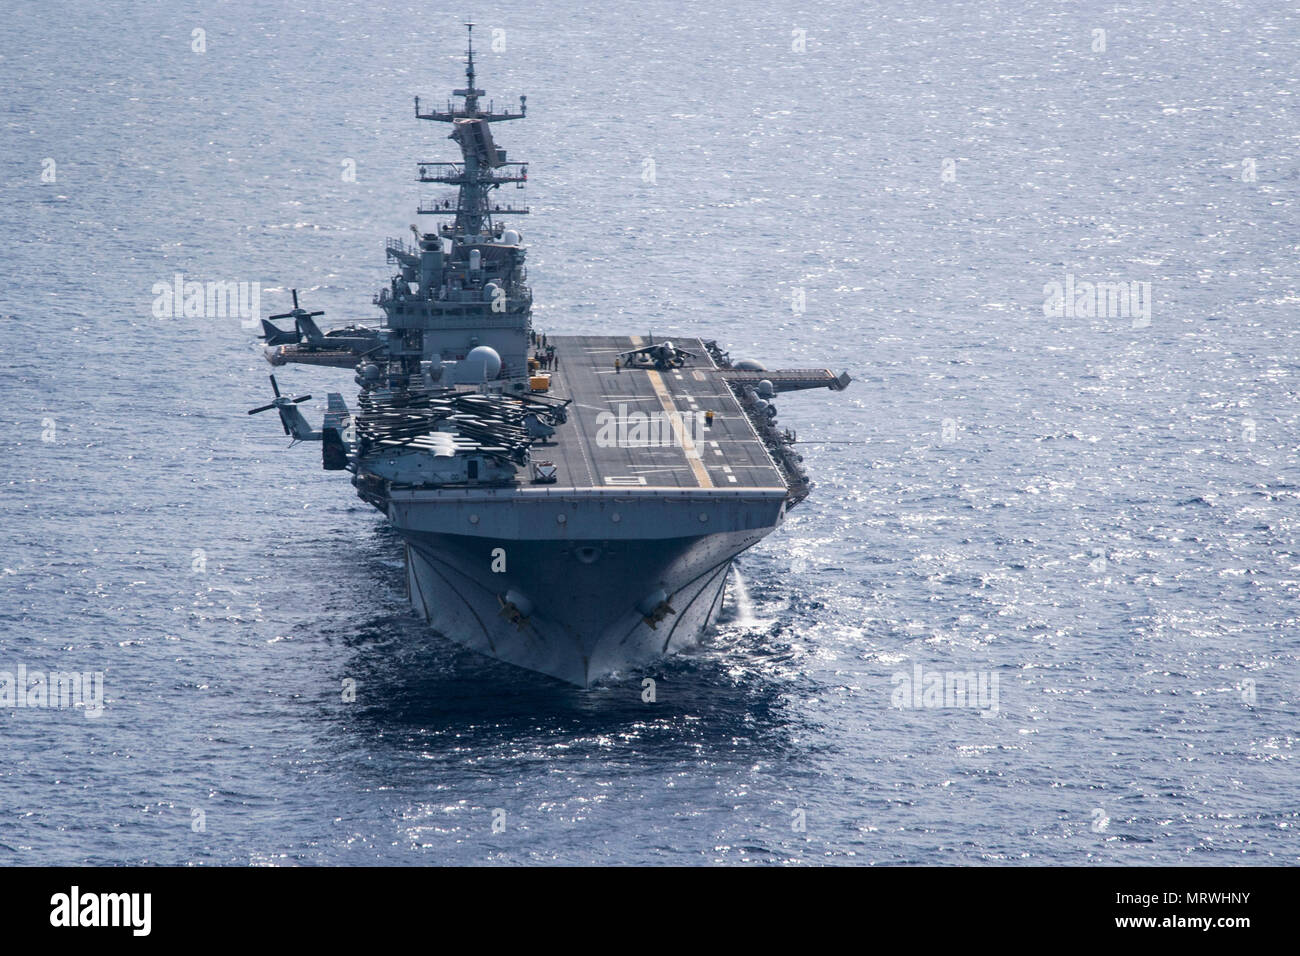 170709-N-WF272-923 CORAL SEA (July 9, 2017) The amphibious assault ship USS Bonhomme Richard (LHD 6) conducts flight operations as the Bonhomme Richard Expeditionary Strike Group (BHR ESG) transits the Coral Sea during Talisman Saber 17. Bonhomme Richard, part of a combined U.S.-Australia-New Zealand expeditionary strike group, is undergoing a series of scenarios that will increase naval proficiencies in operating against blue-water adversarial threats and in its primary mission of launching Marine forces ashore in the littorals. Talisman Saber is a biennial U.S.-Australia bilateral exercise h Stock Photo